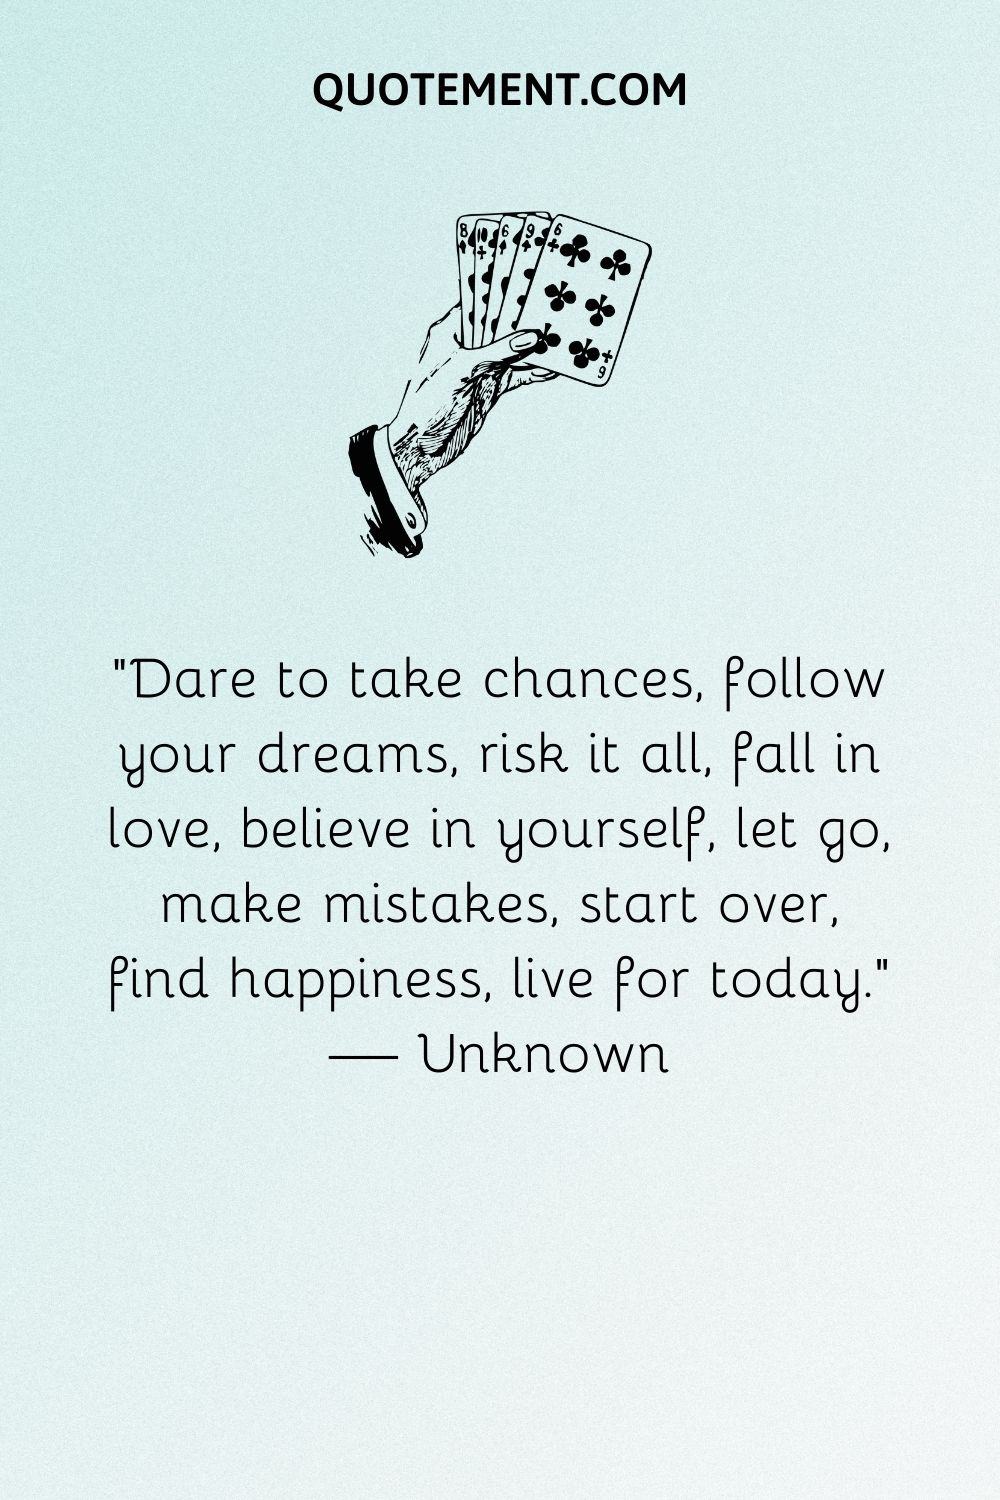 Dare to take chances, follow your dreams, risk it all, fall in love, believe in yourself